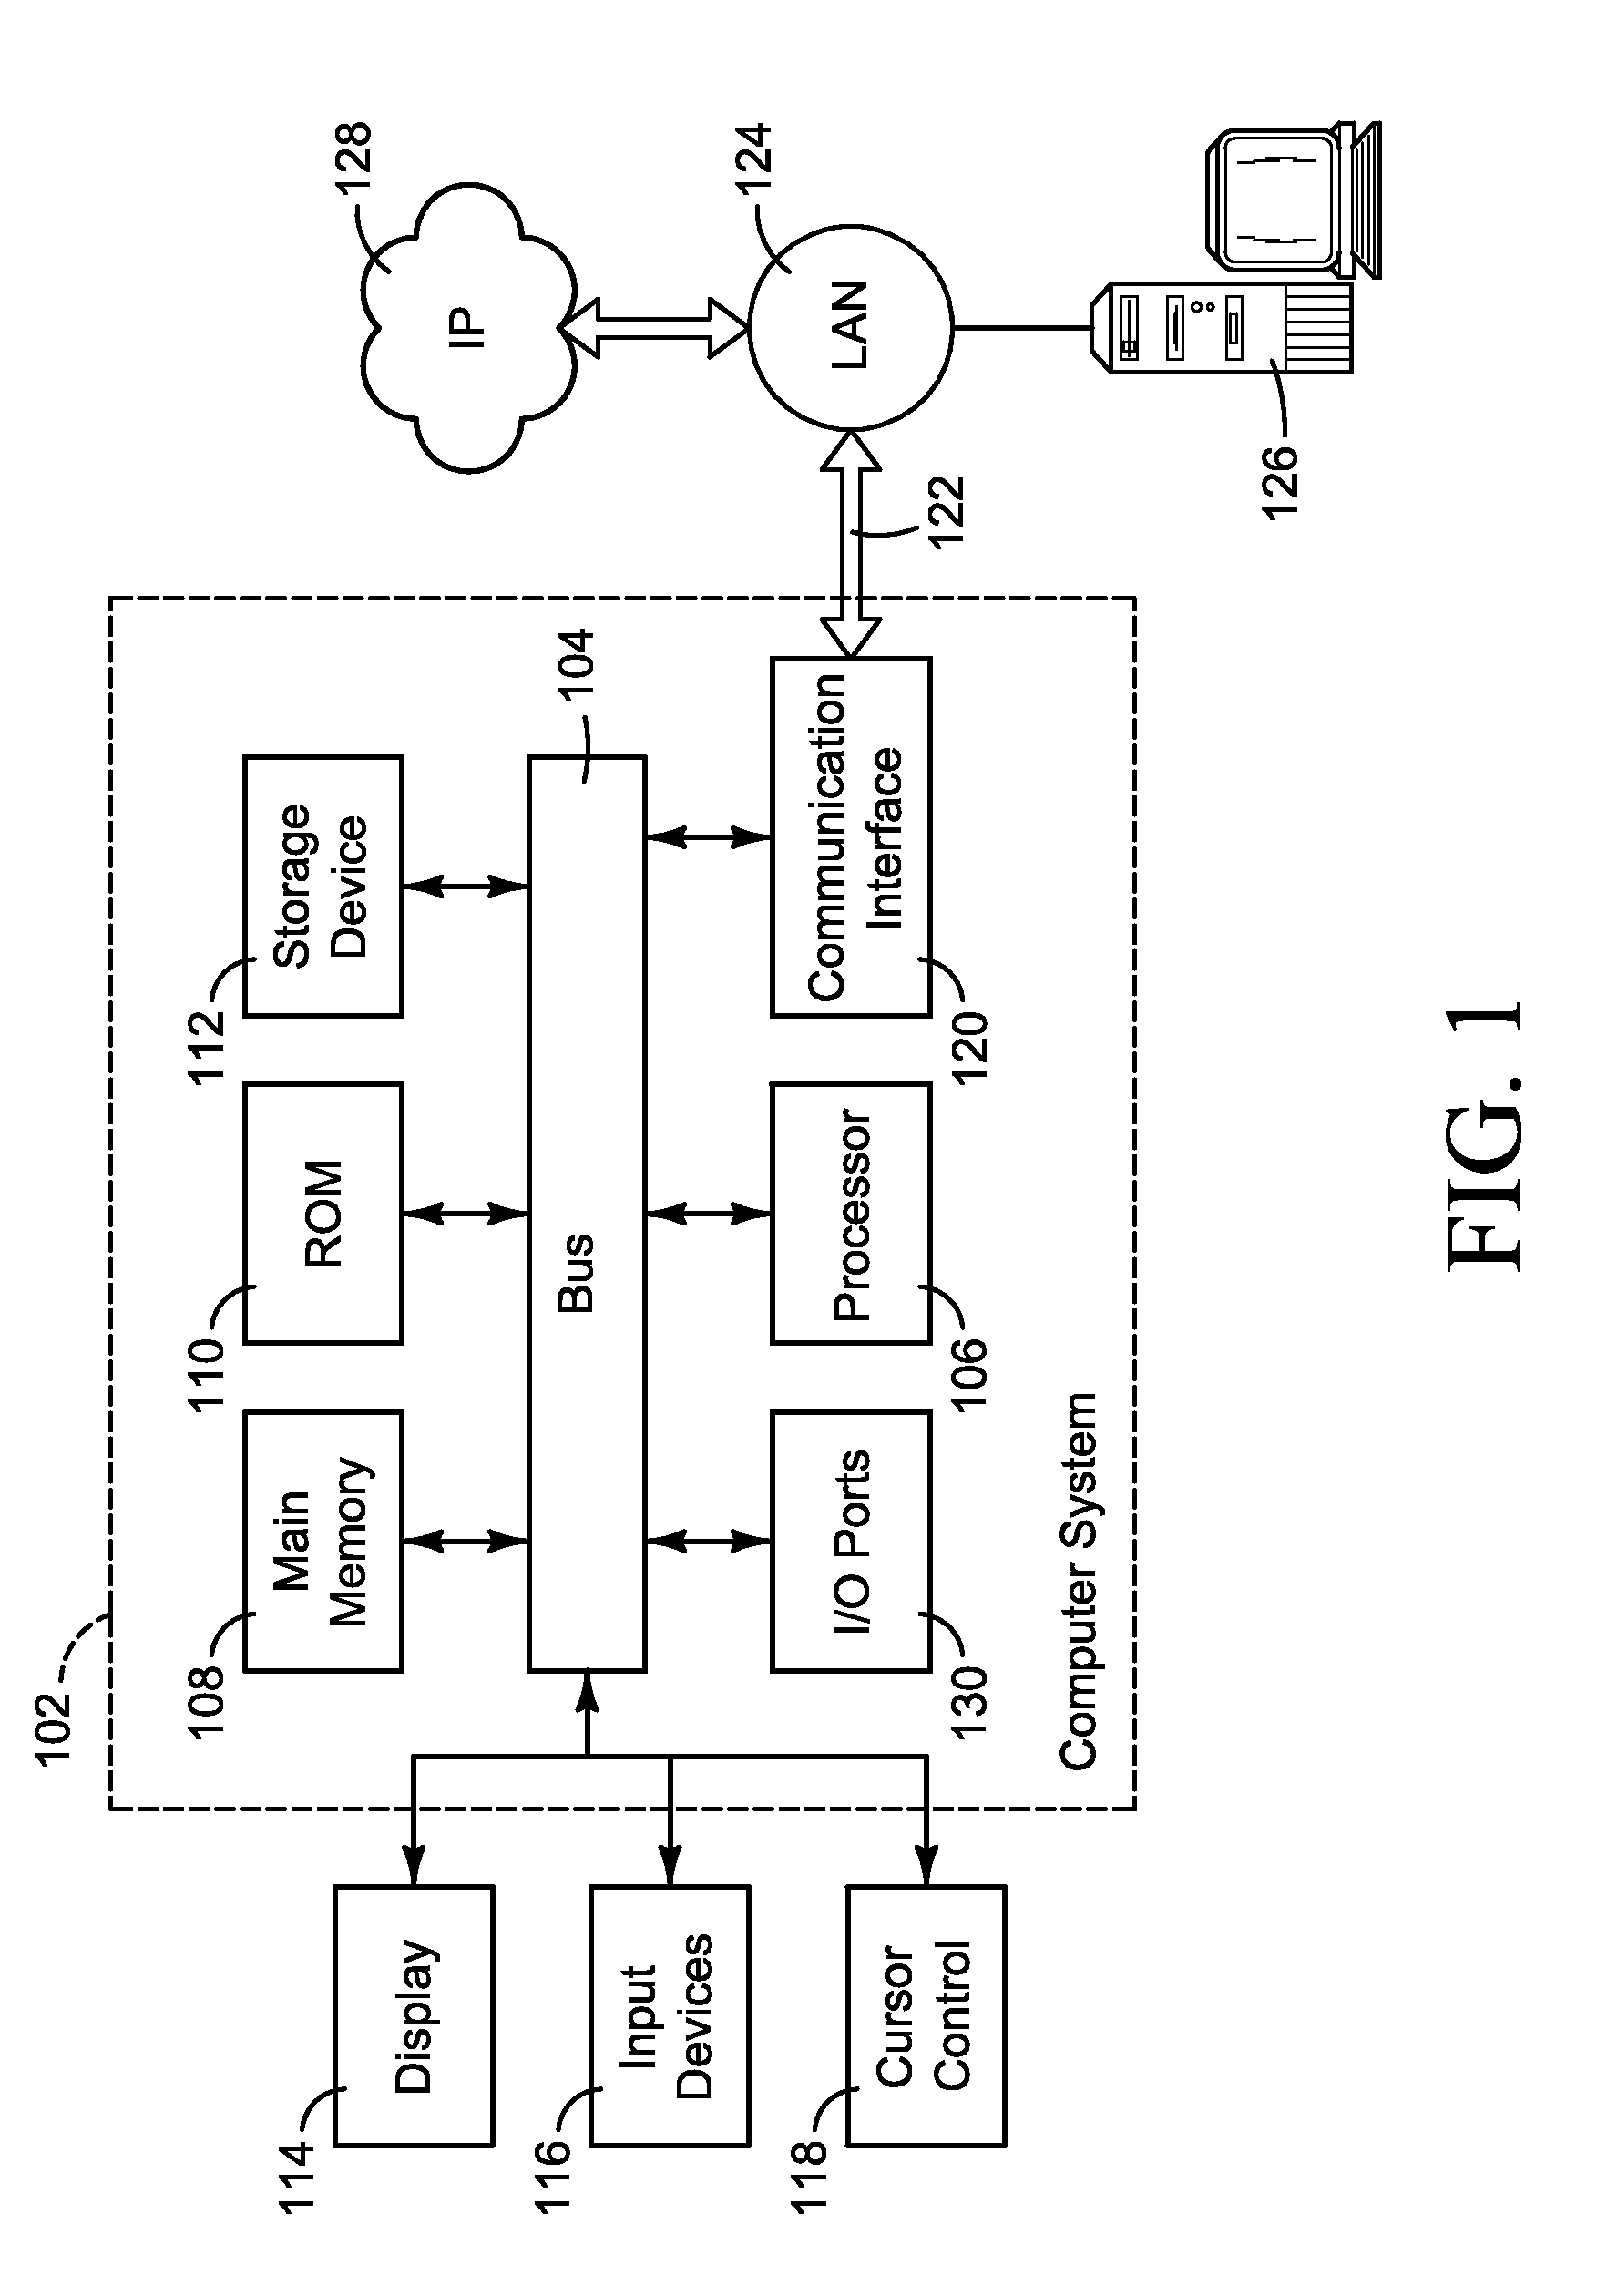 Method and System of Managing Digital Multimedia Content